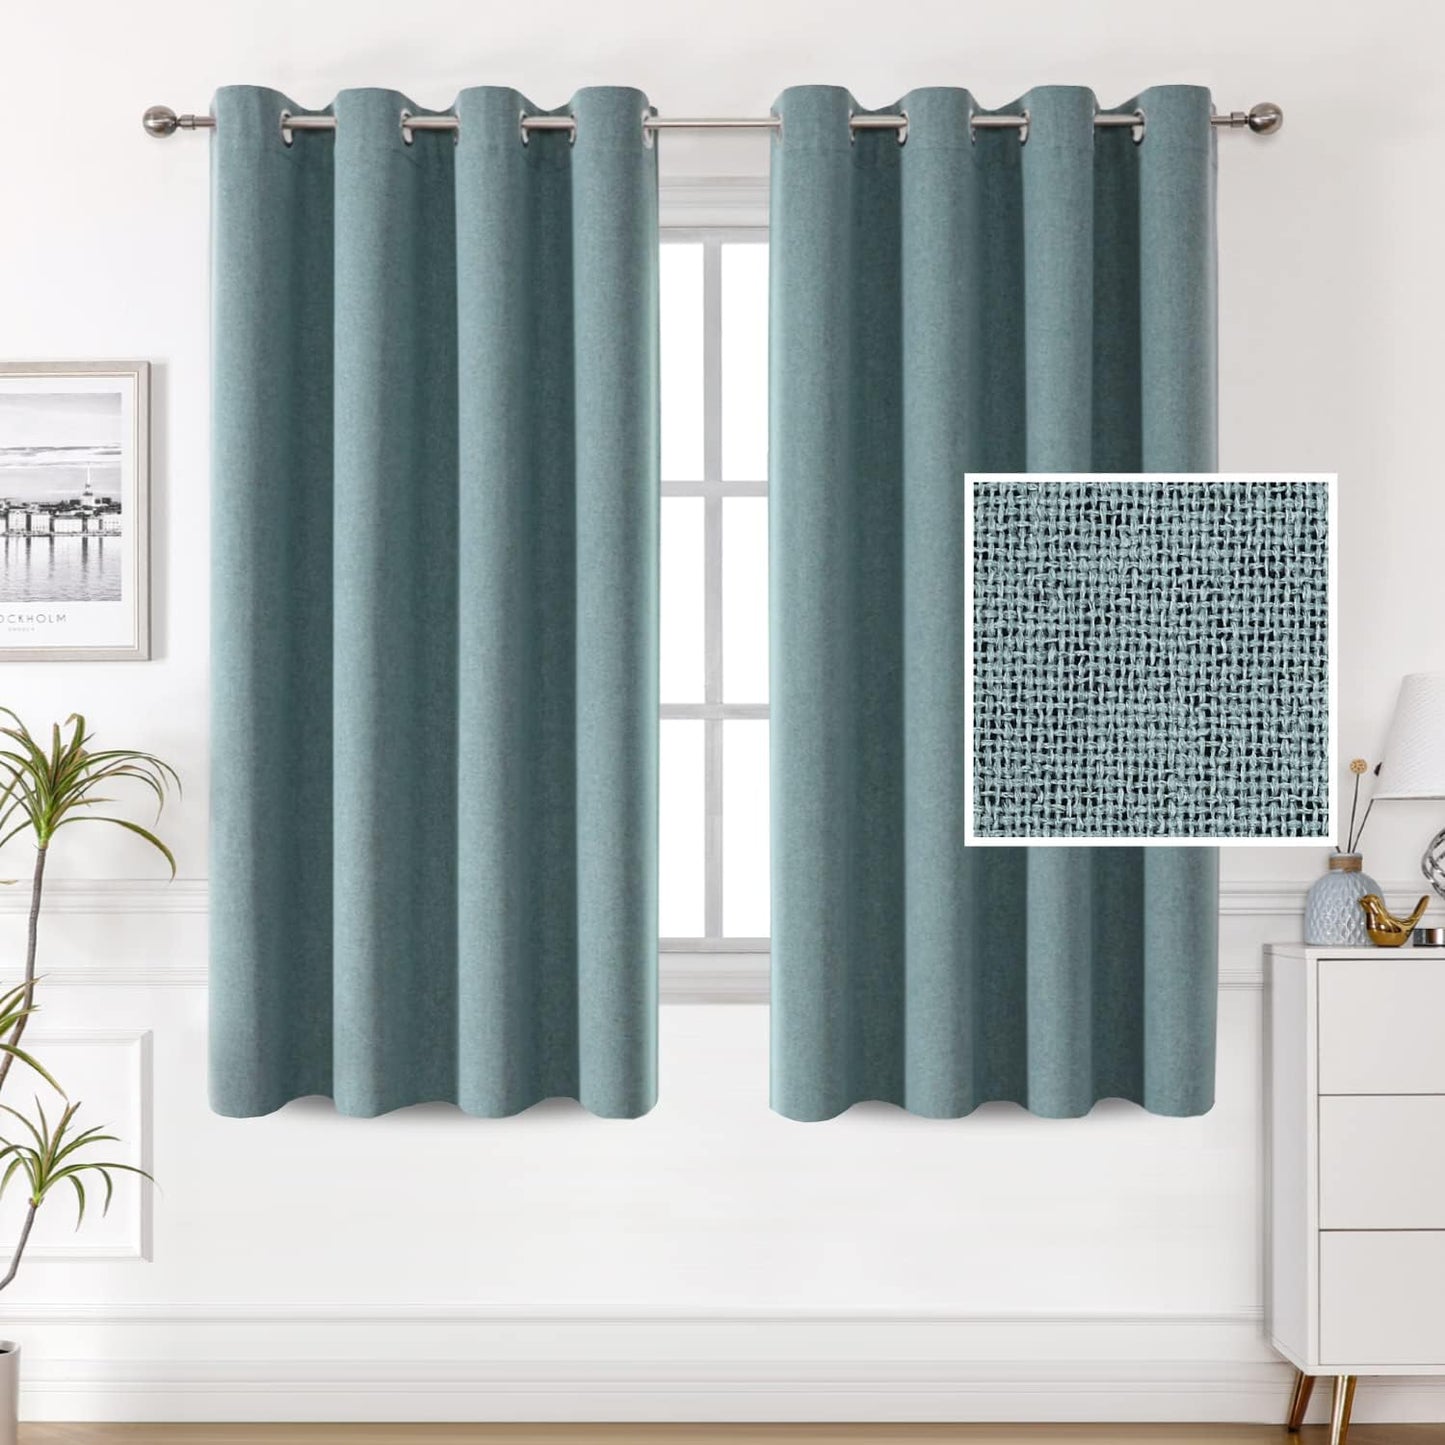 H.VERSAILTEX 100% Blackout Linen Look Curtains Thermal Insulated Curtains for Living Room Textured Burlap Drapes for Bedroom Grommet Linen Noise Blocking Curtains 42 X 84 Inch, 2 Panels - Sage  H.VERSAILTEX Stone Blue 52"W X 54"L 